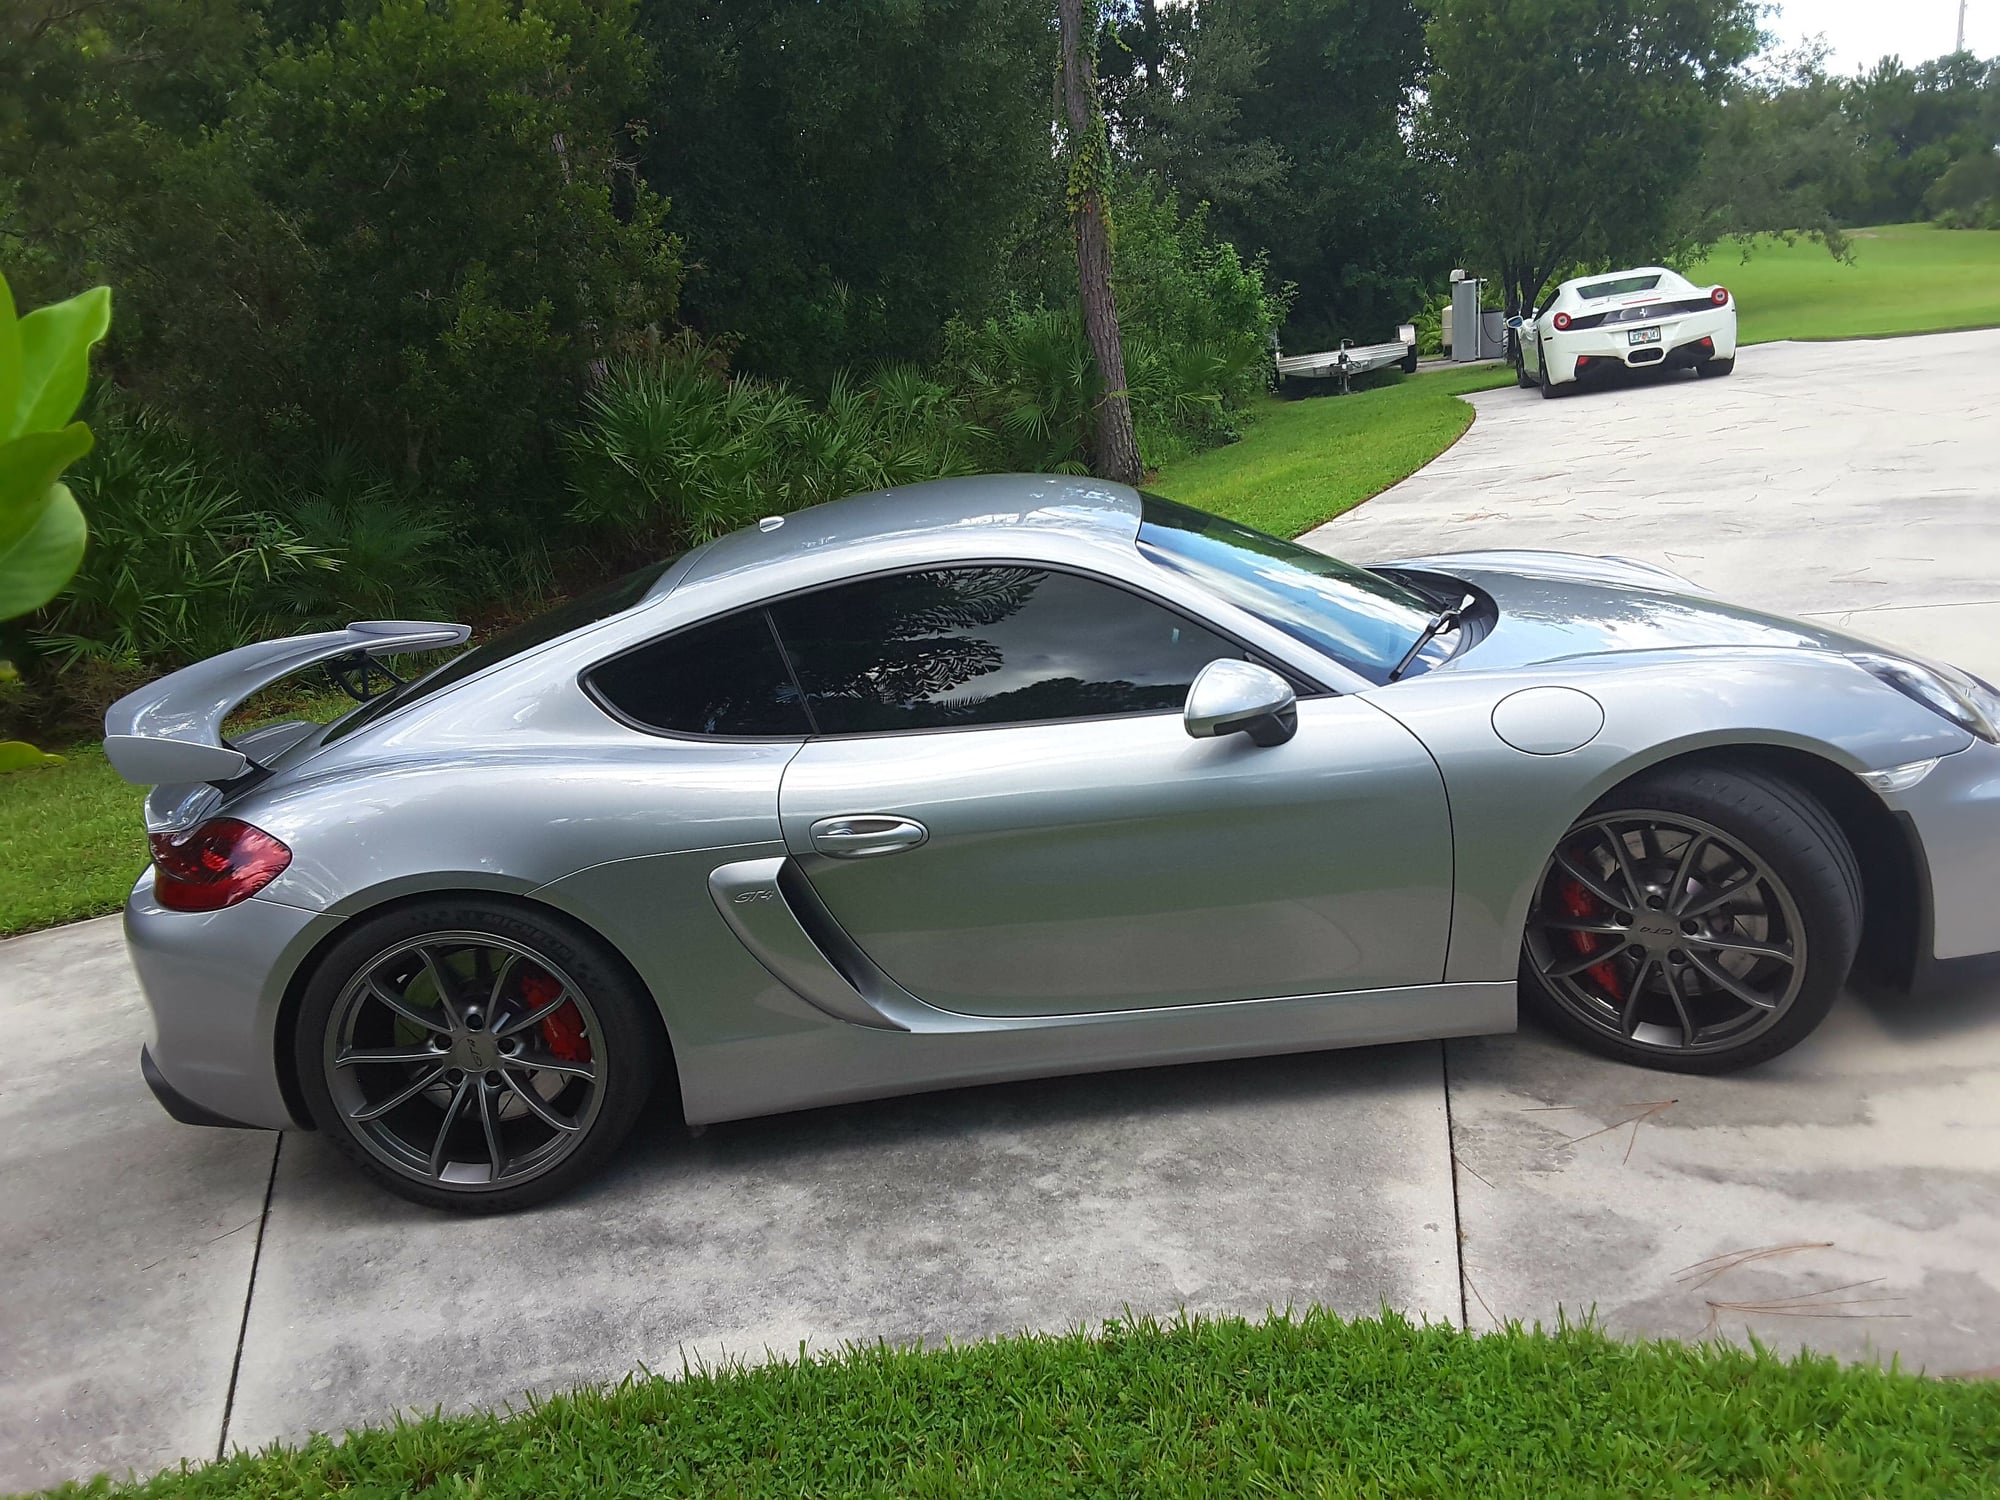 2016 Porsche Cayman GT4 - Track Enthusiast GT4 Dream Car - Used - VIN WP0AC2A83GK191276 - 14,000 Miles - 6 cyl - 2WD - Manual - Coupe - Silver - Bradenton, FL 34211, United States